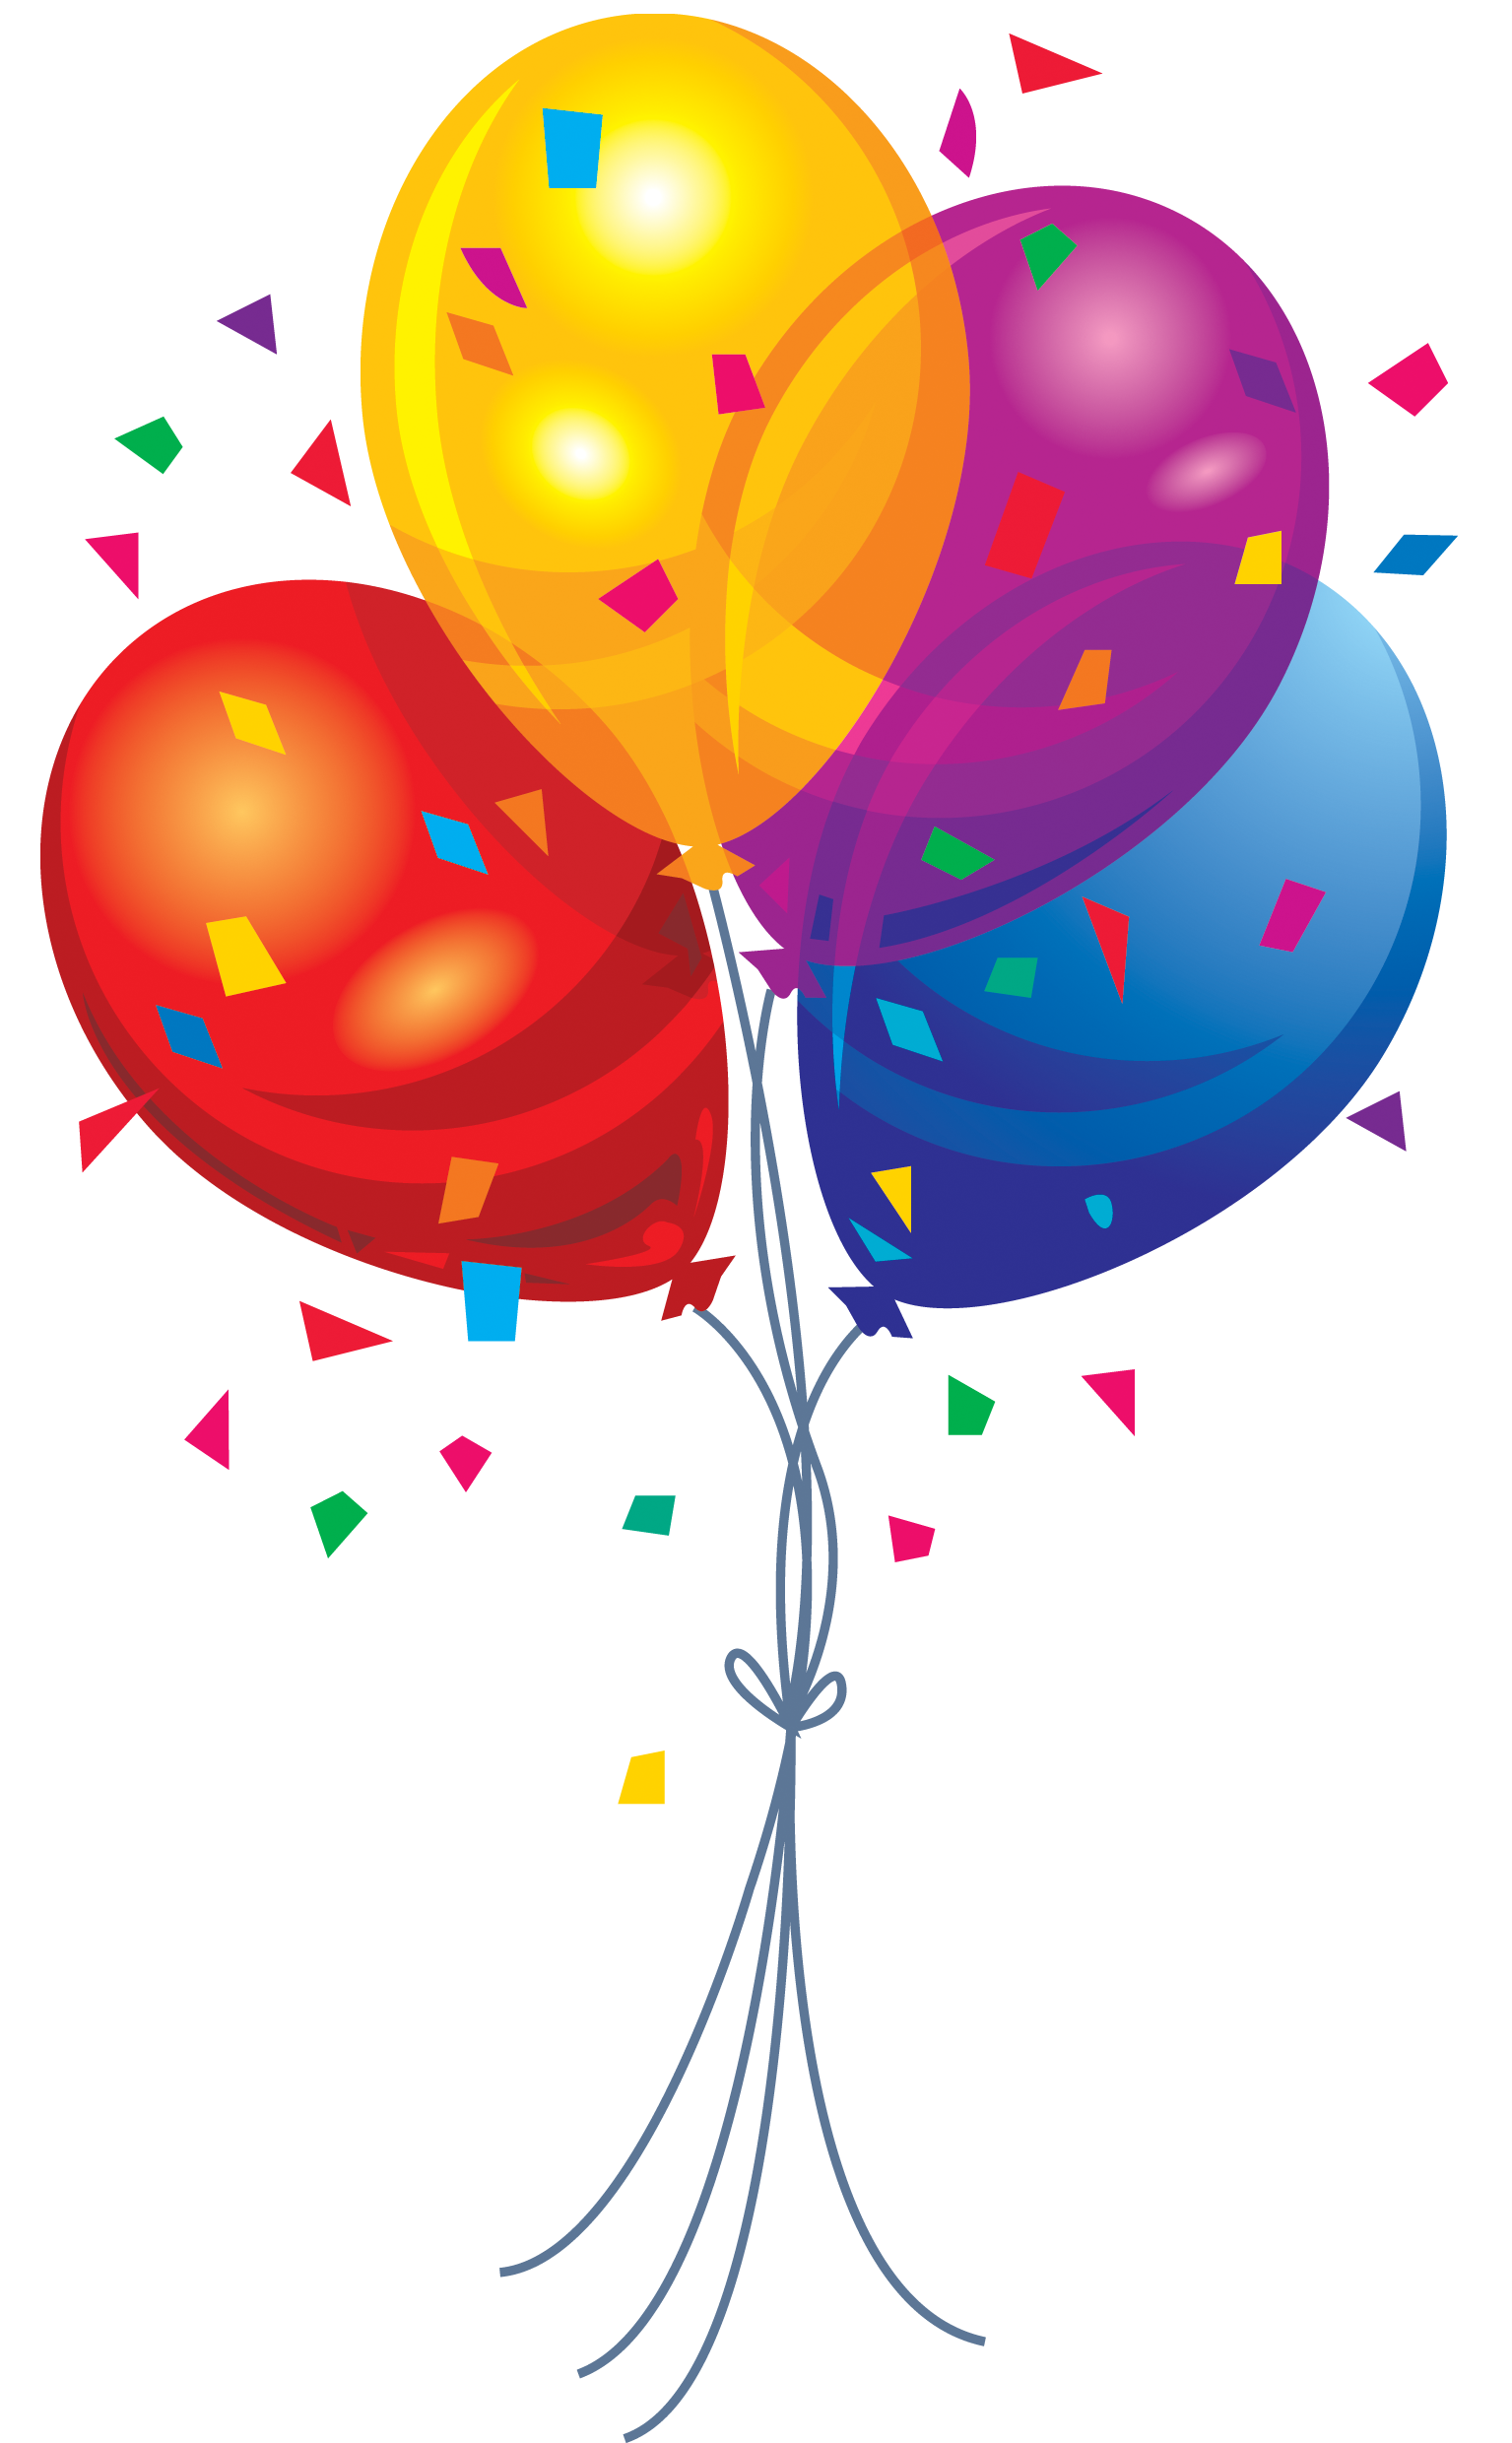 PlusPNG - Balloon PNG